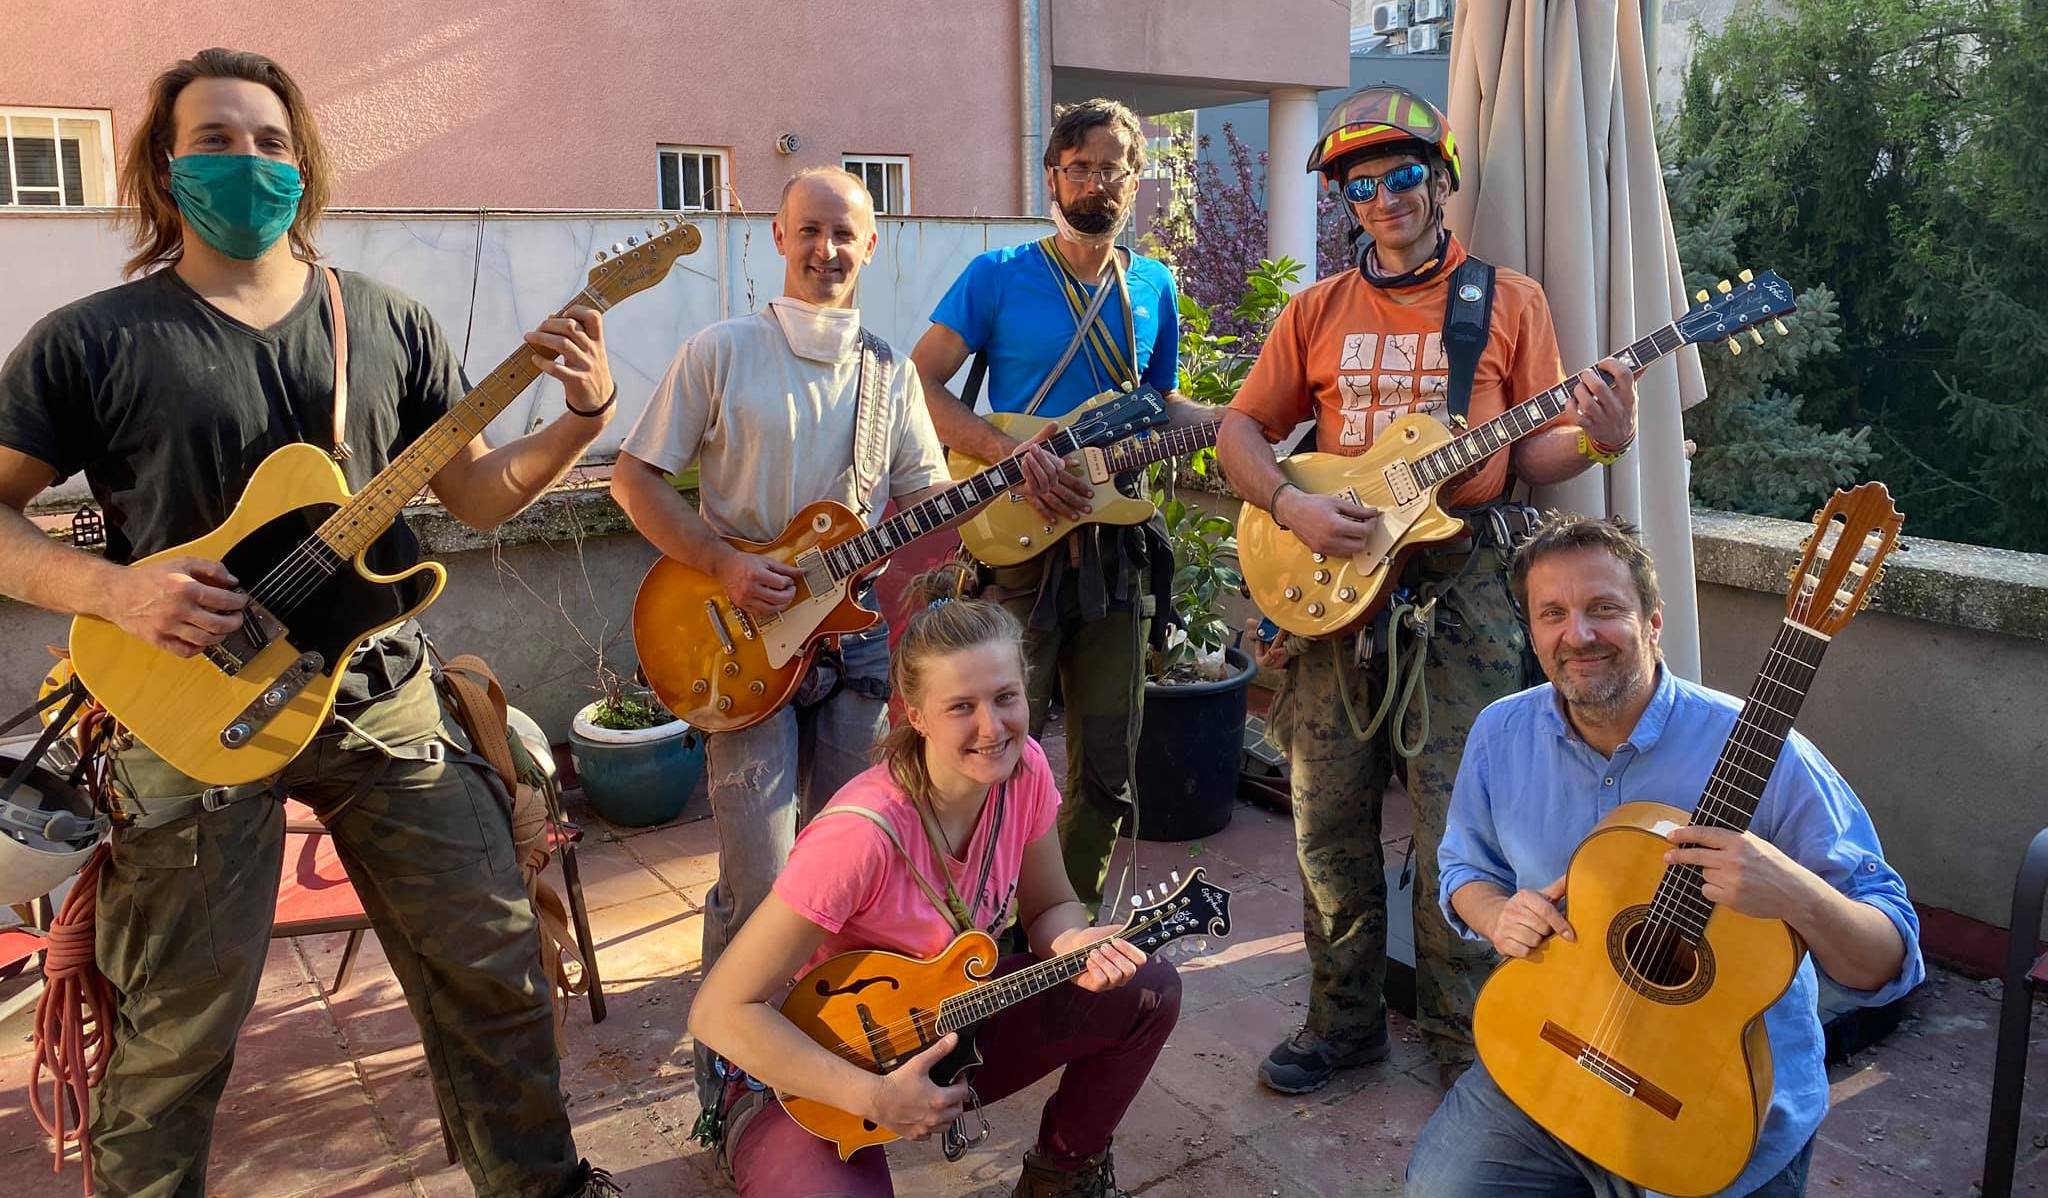 Well-known Croatian jazz musician Ante Gelo (lower right) poses with volunteers who cleared his roof from the loose material. Gelo played for them while they were working on the roof and showed them a collection of his fine guitars. [Photo] Courtesy of Ante Gelo